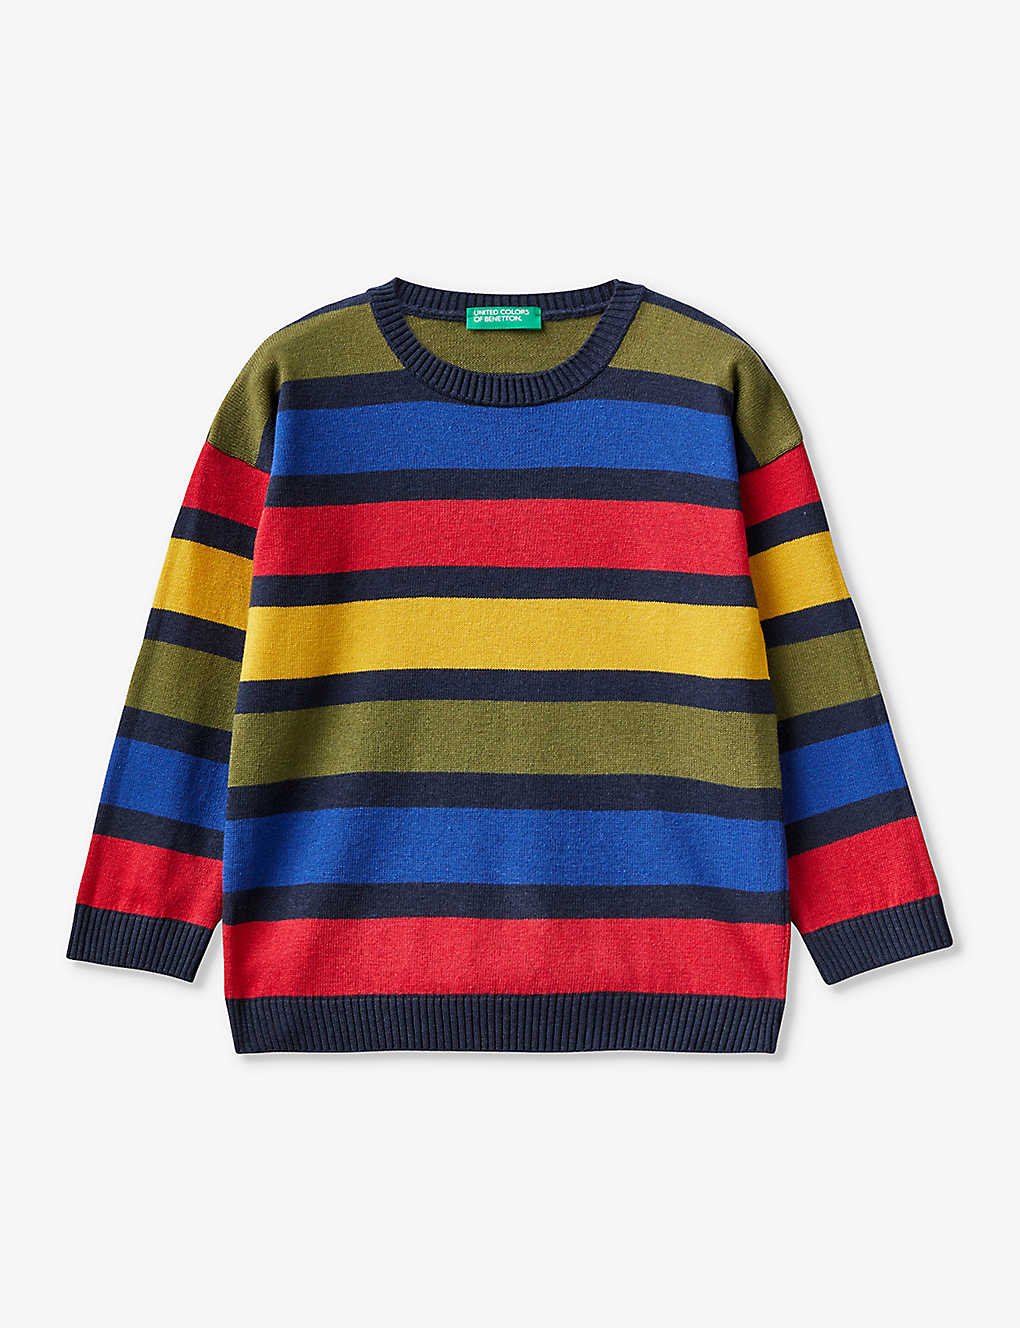 Benetton Boys Multicoloured Kids Striped Knitted Jumper 3-6 Years